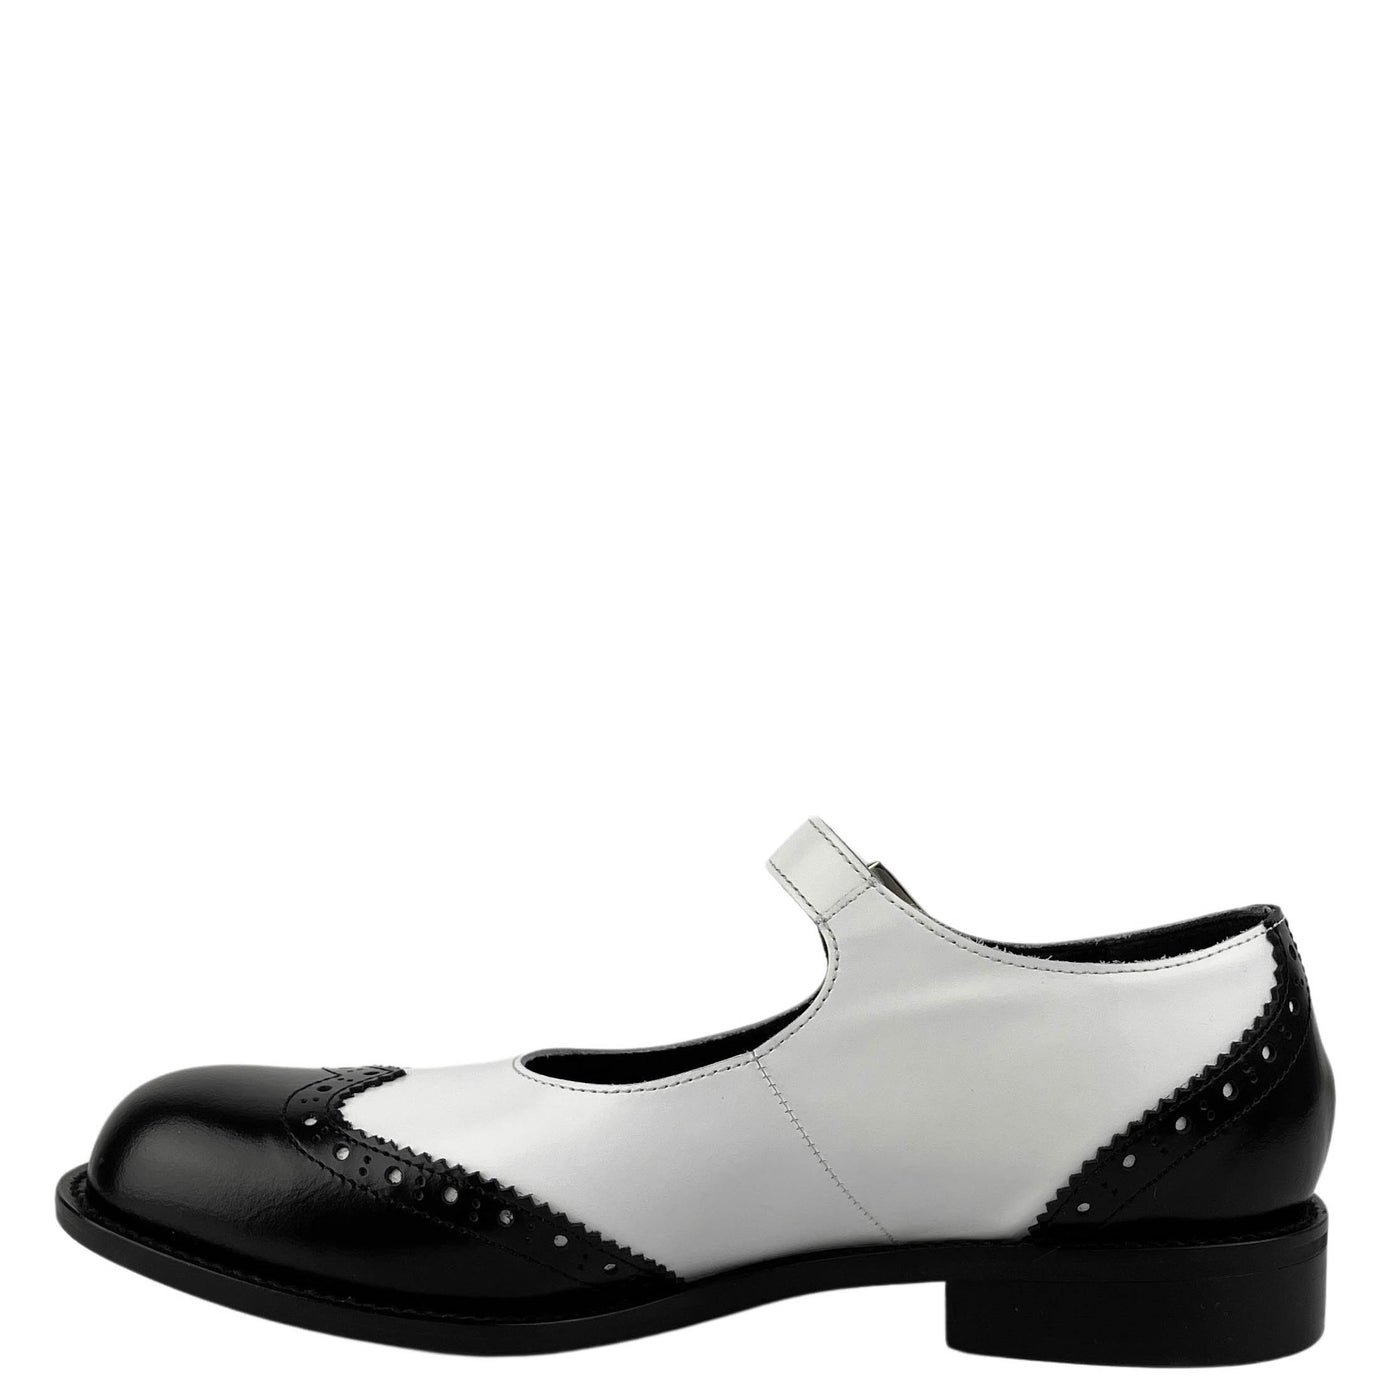 COMME des GARÇONS Mary Janes in Black and White - Discounts on Comme des Garçons at UAL